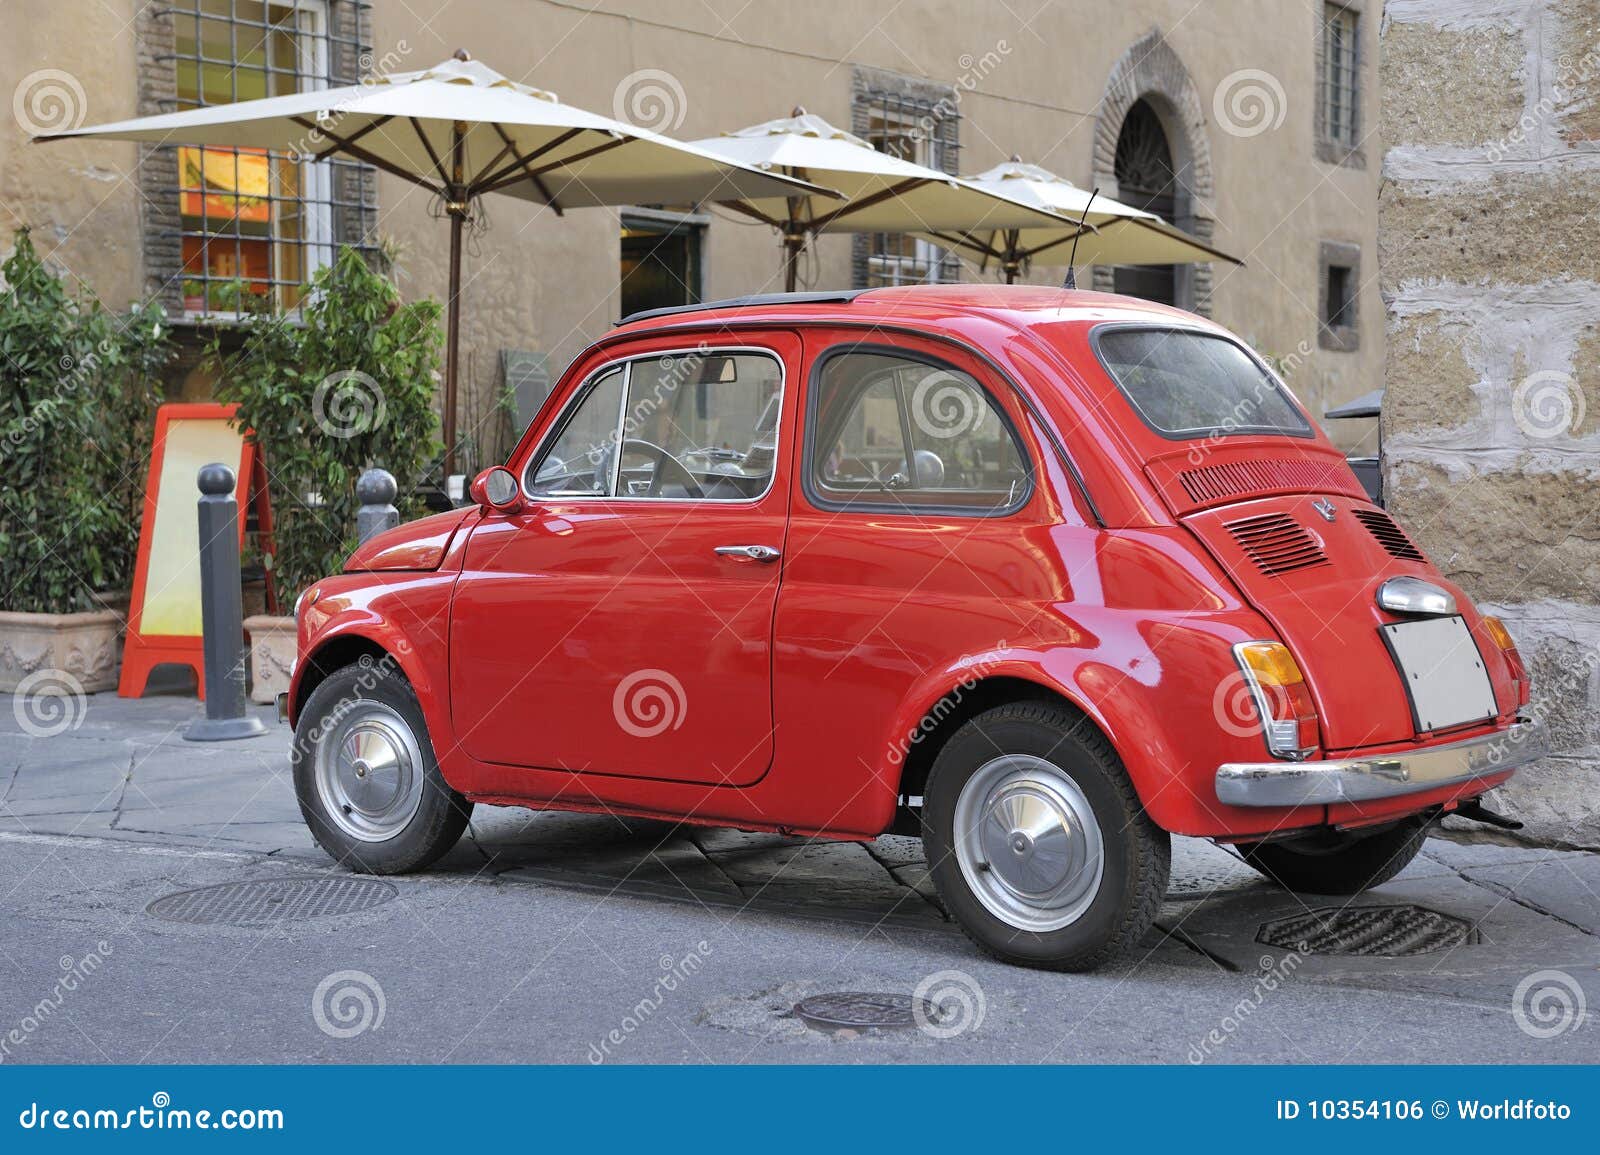 classic streetscene with red fiat car